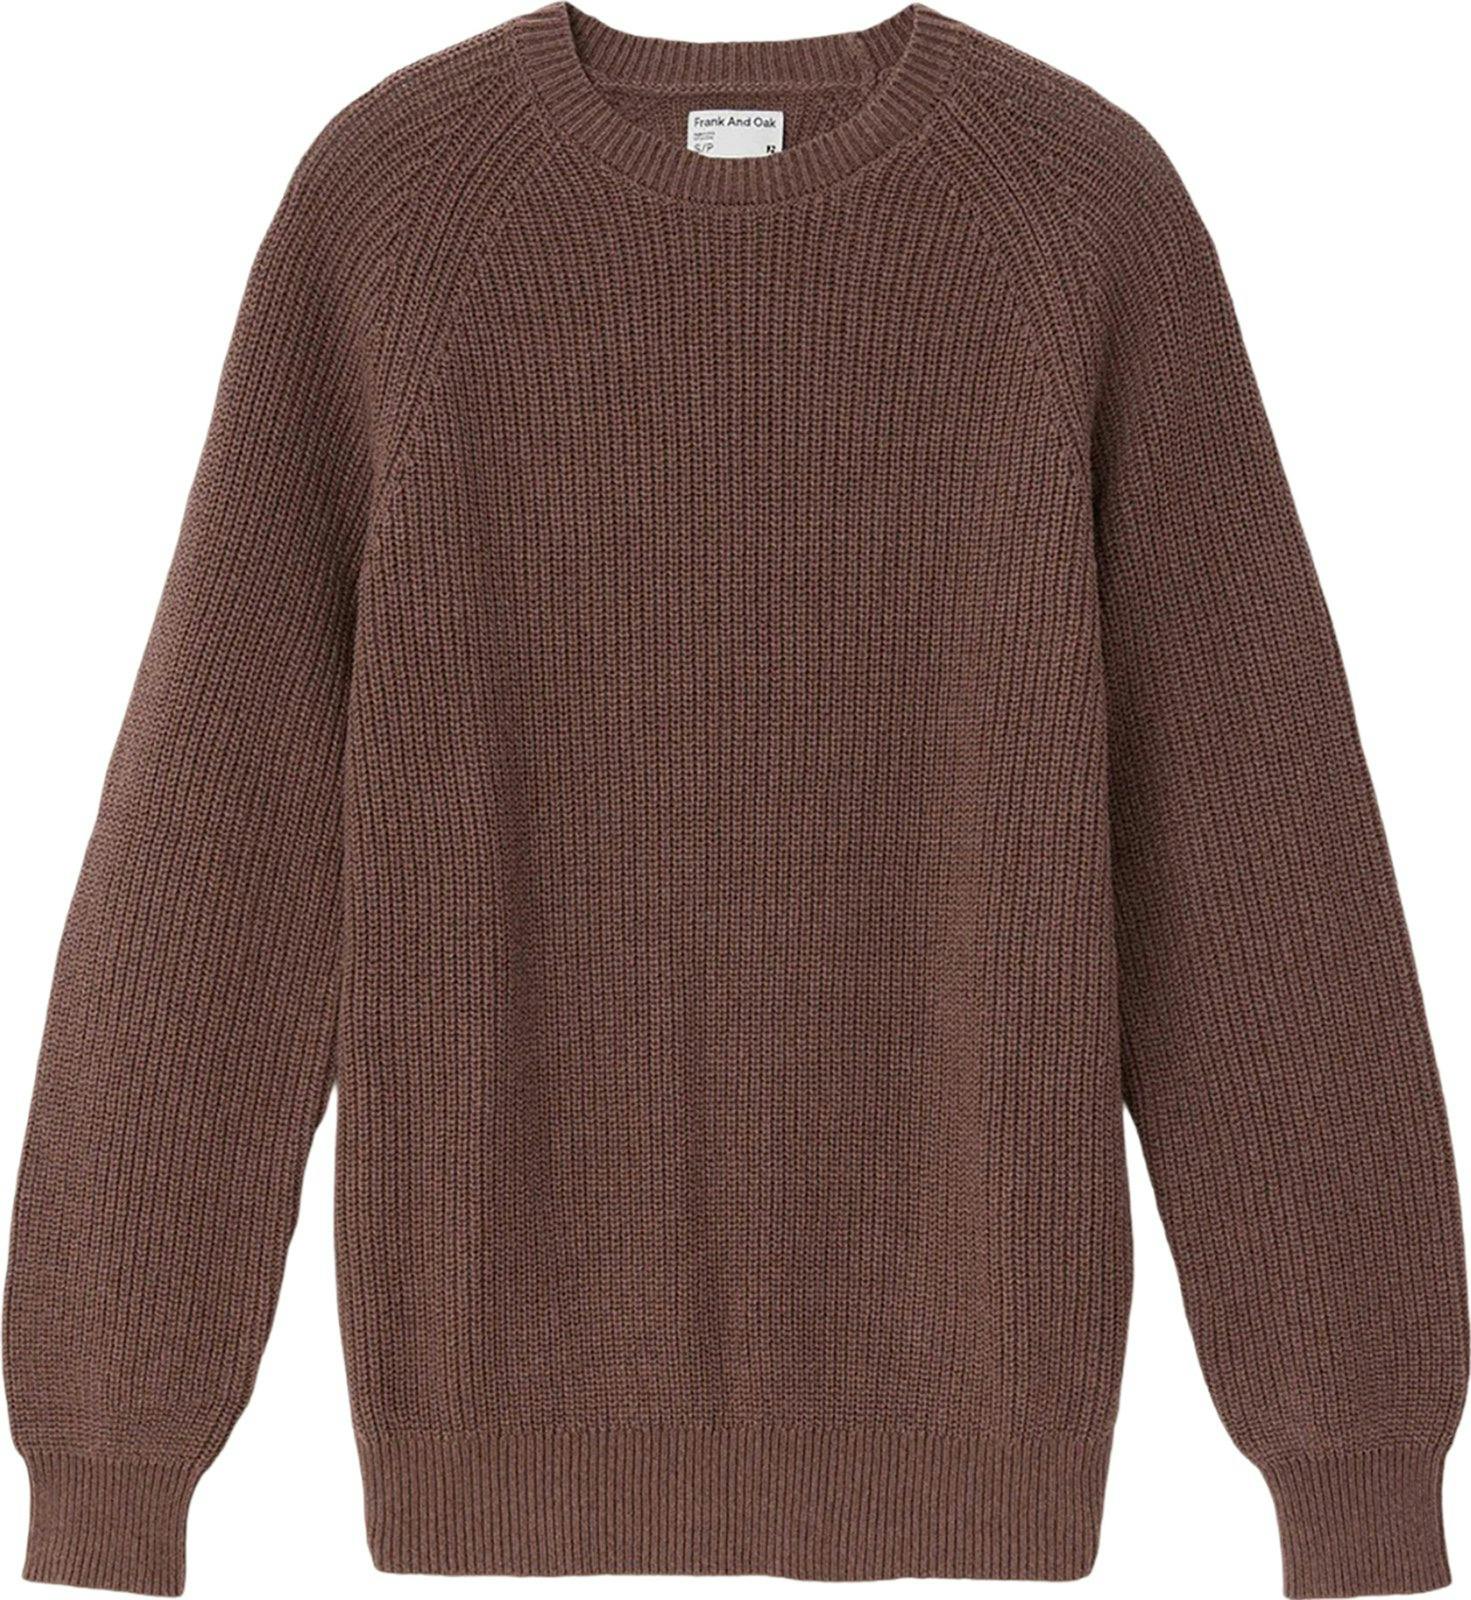 Product image for Ribbed Crewneck Sweater - Men's